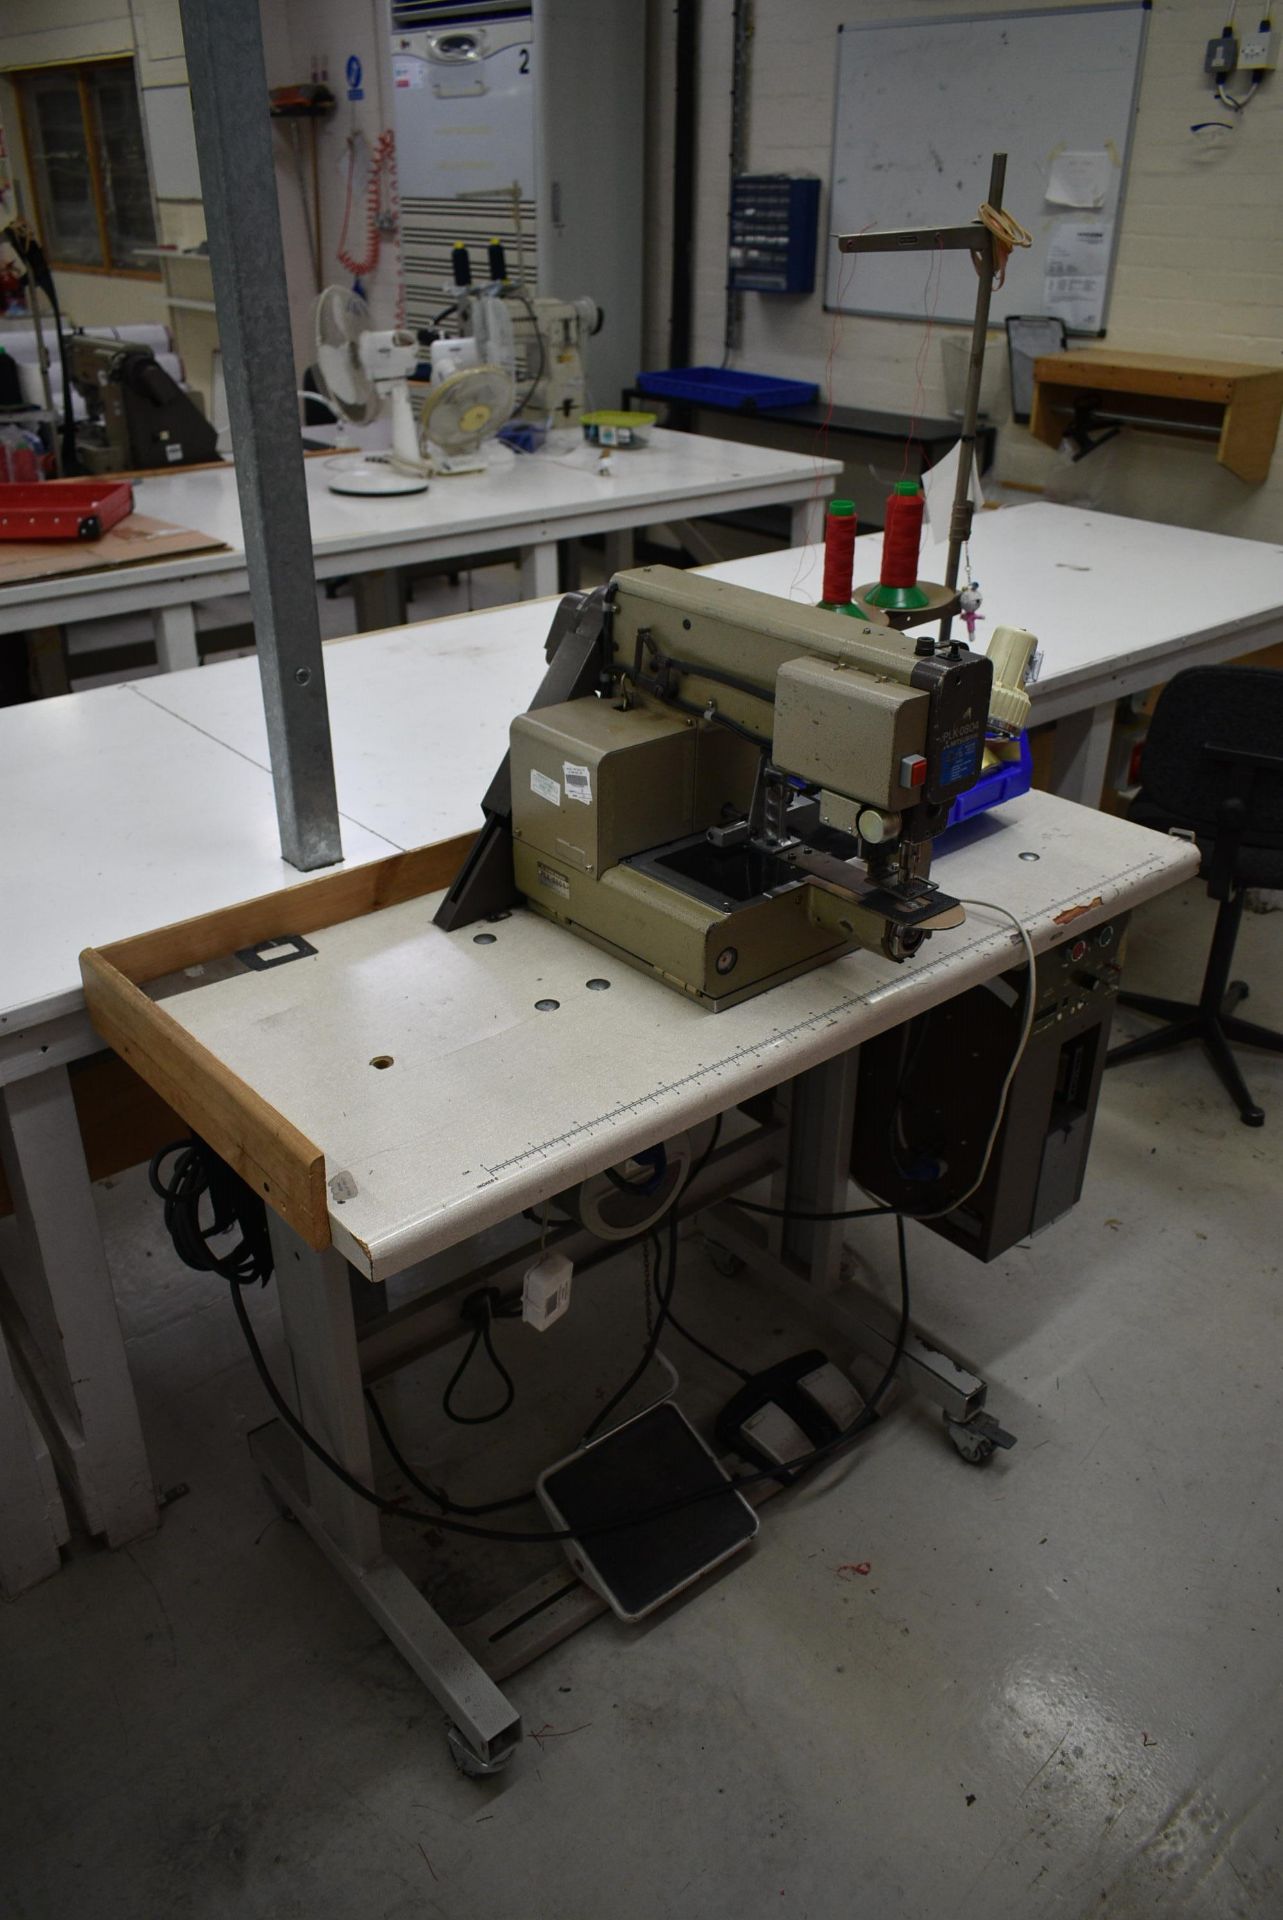 Mitsubishi PLK-08049 PROGRAMMABLE SEWING MACHINE, serial no. 781119, with Limi-Stop Z electric motor - Image 2 of 7